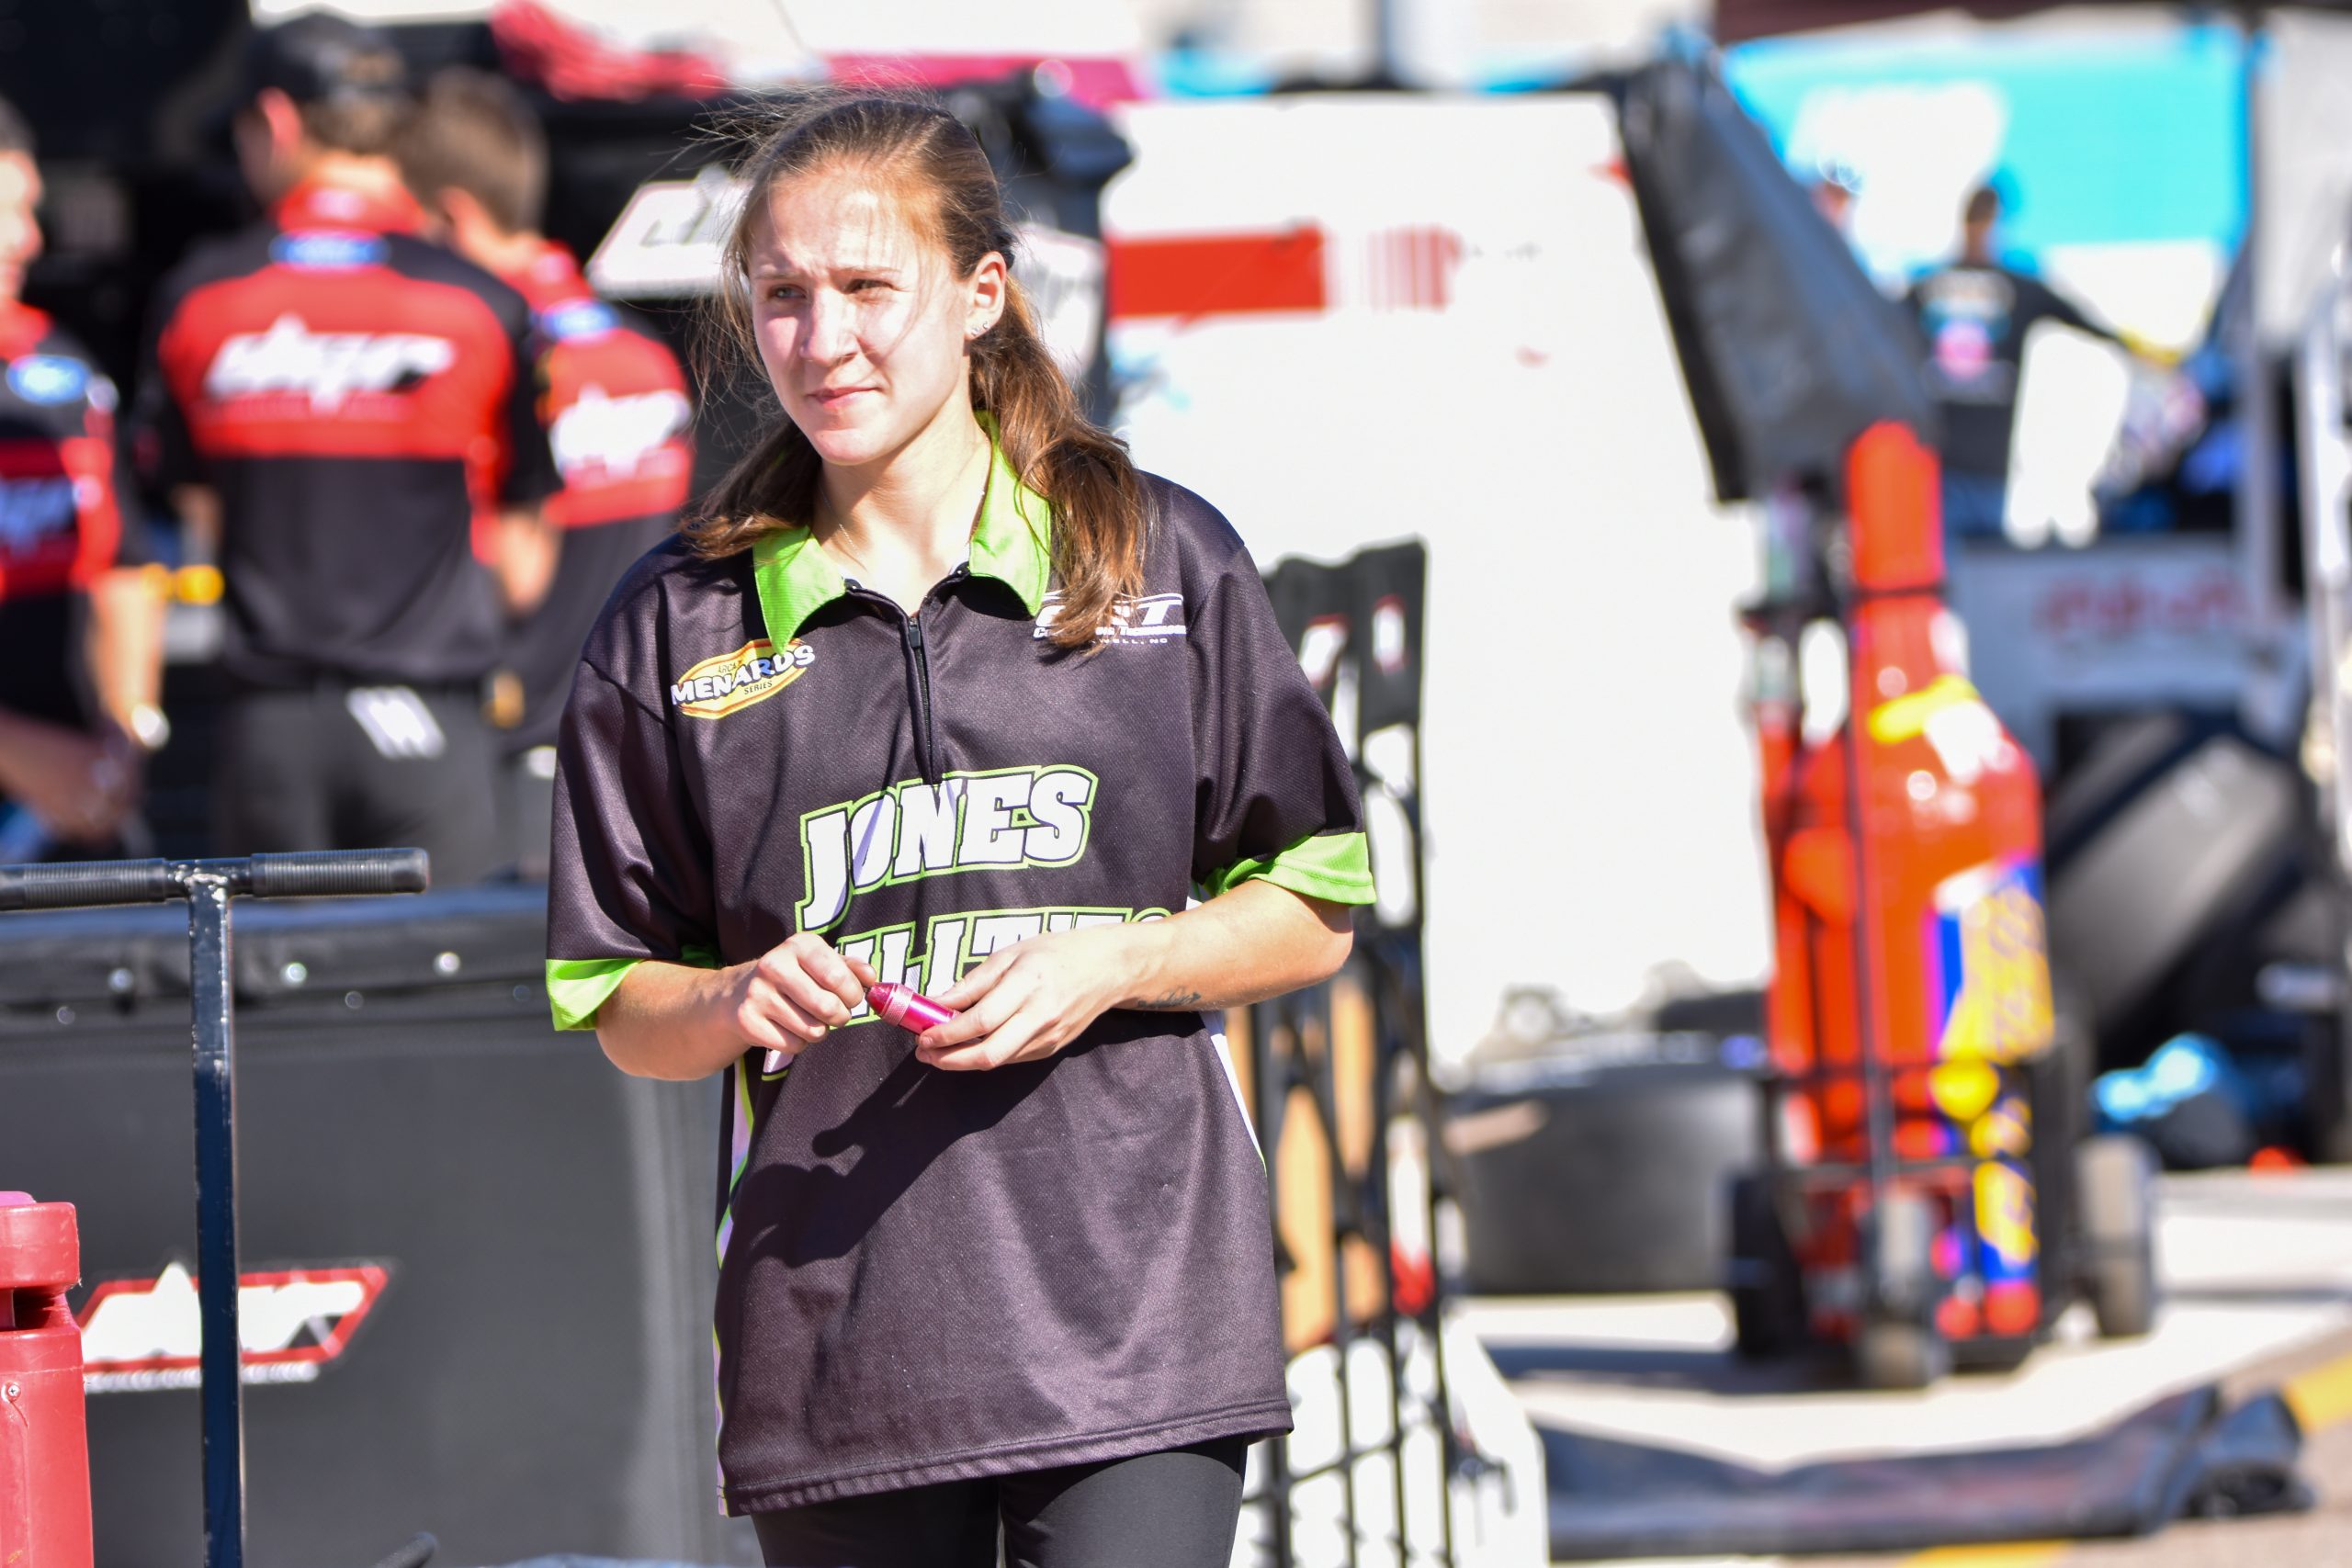 Slagle's always hard at work when she's at the track. (Photo: Luis Torres | The Podium Finish)